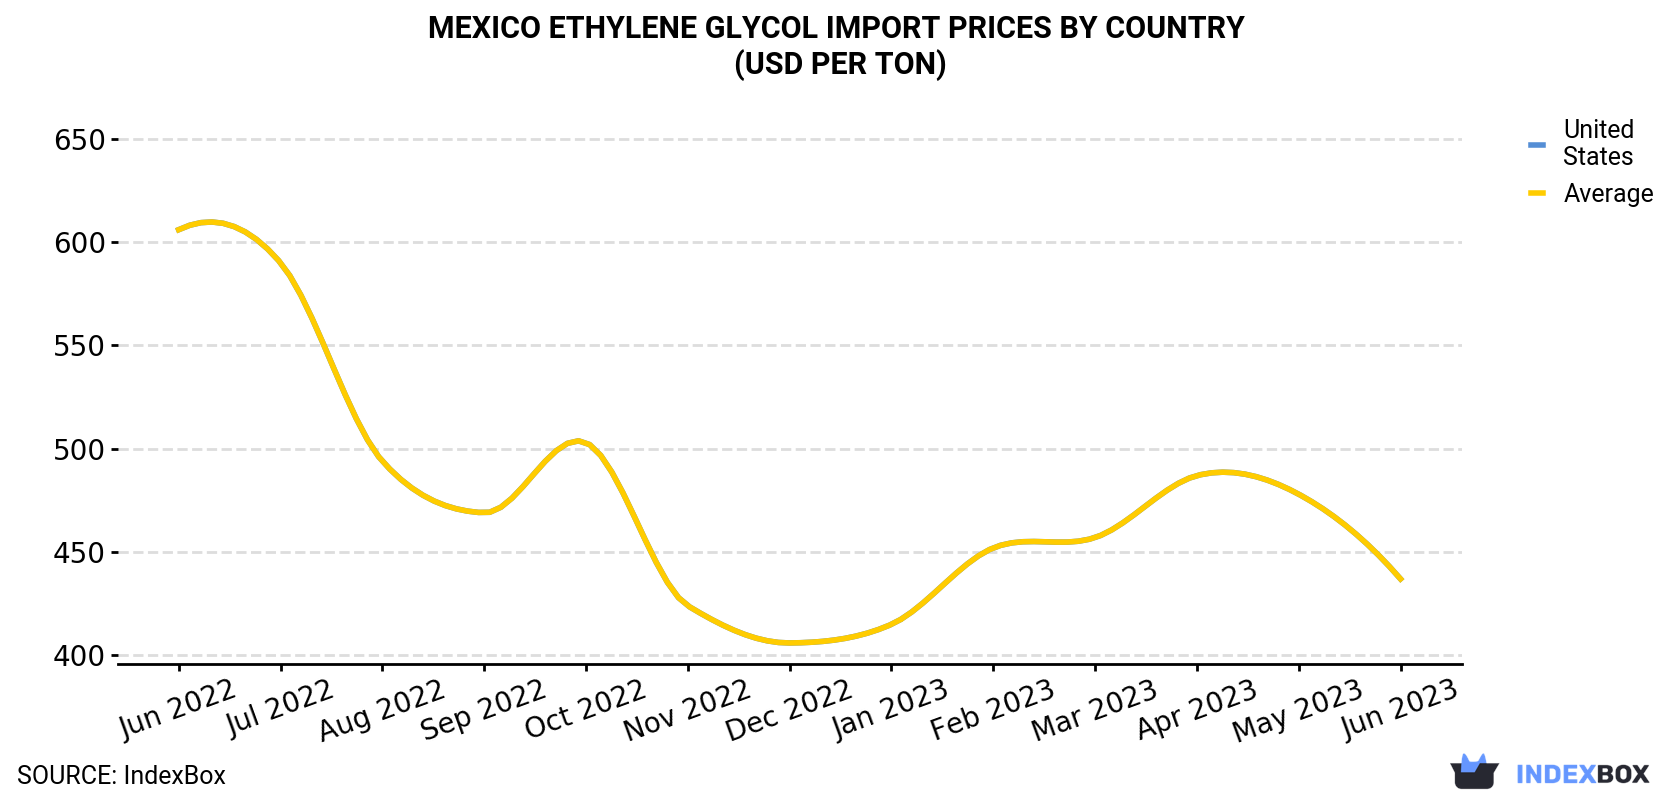 Mexico Ethylene Glycol Import Prices By Country (USD Per Ton)